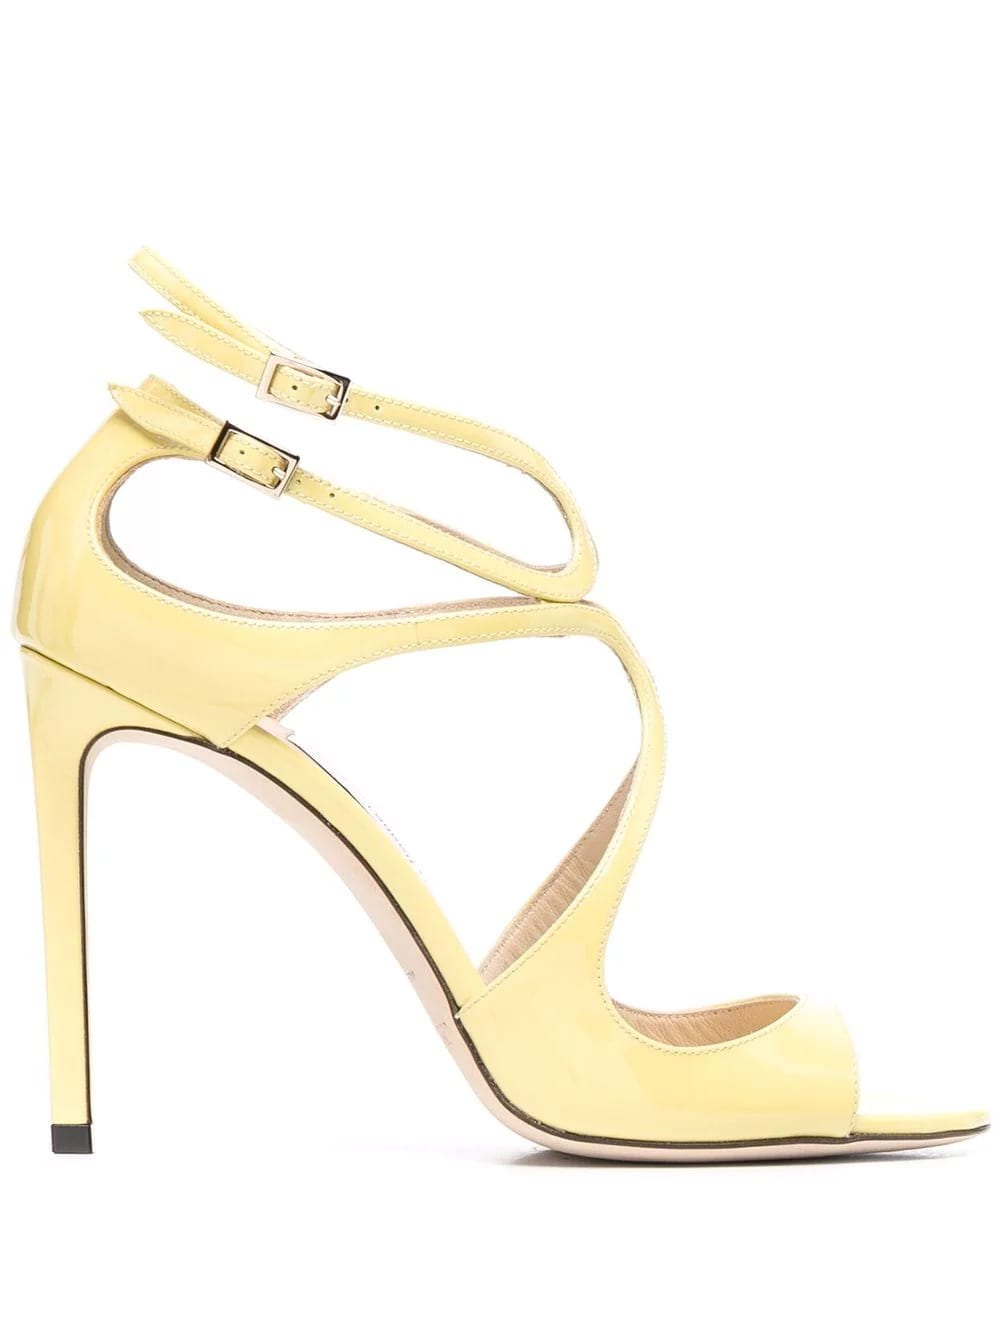 Jimmy Choo 100mm Lang Patent Leather Sandals In Green | ModeSens